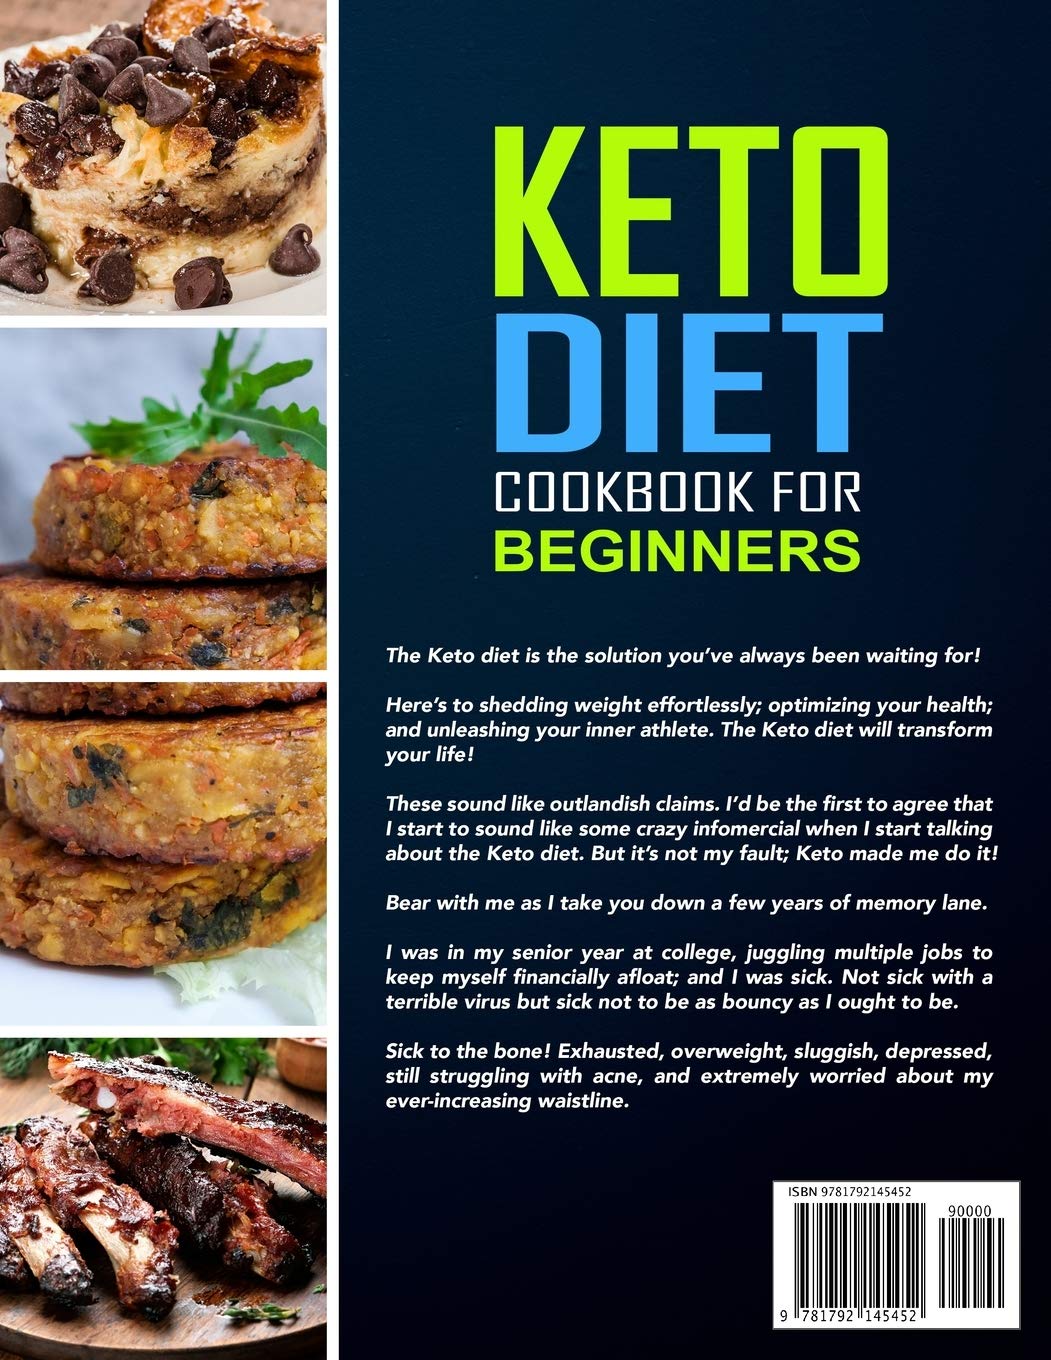 Keto Diet Cookbook For Beginners: 550 Recipes For Busy People on Keto Diet (Keto Recipes for Beginners)